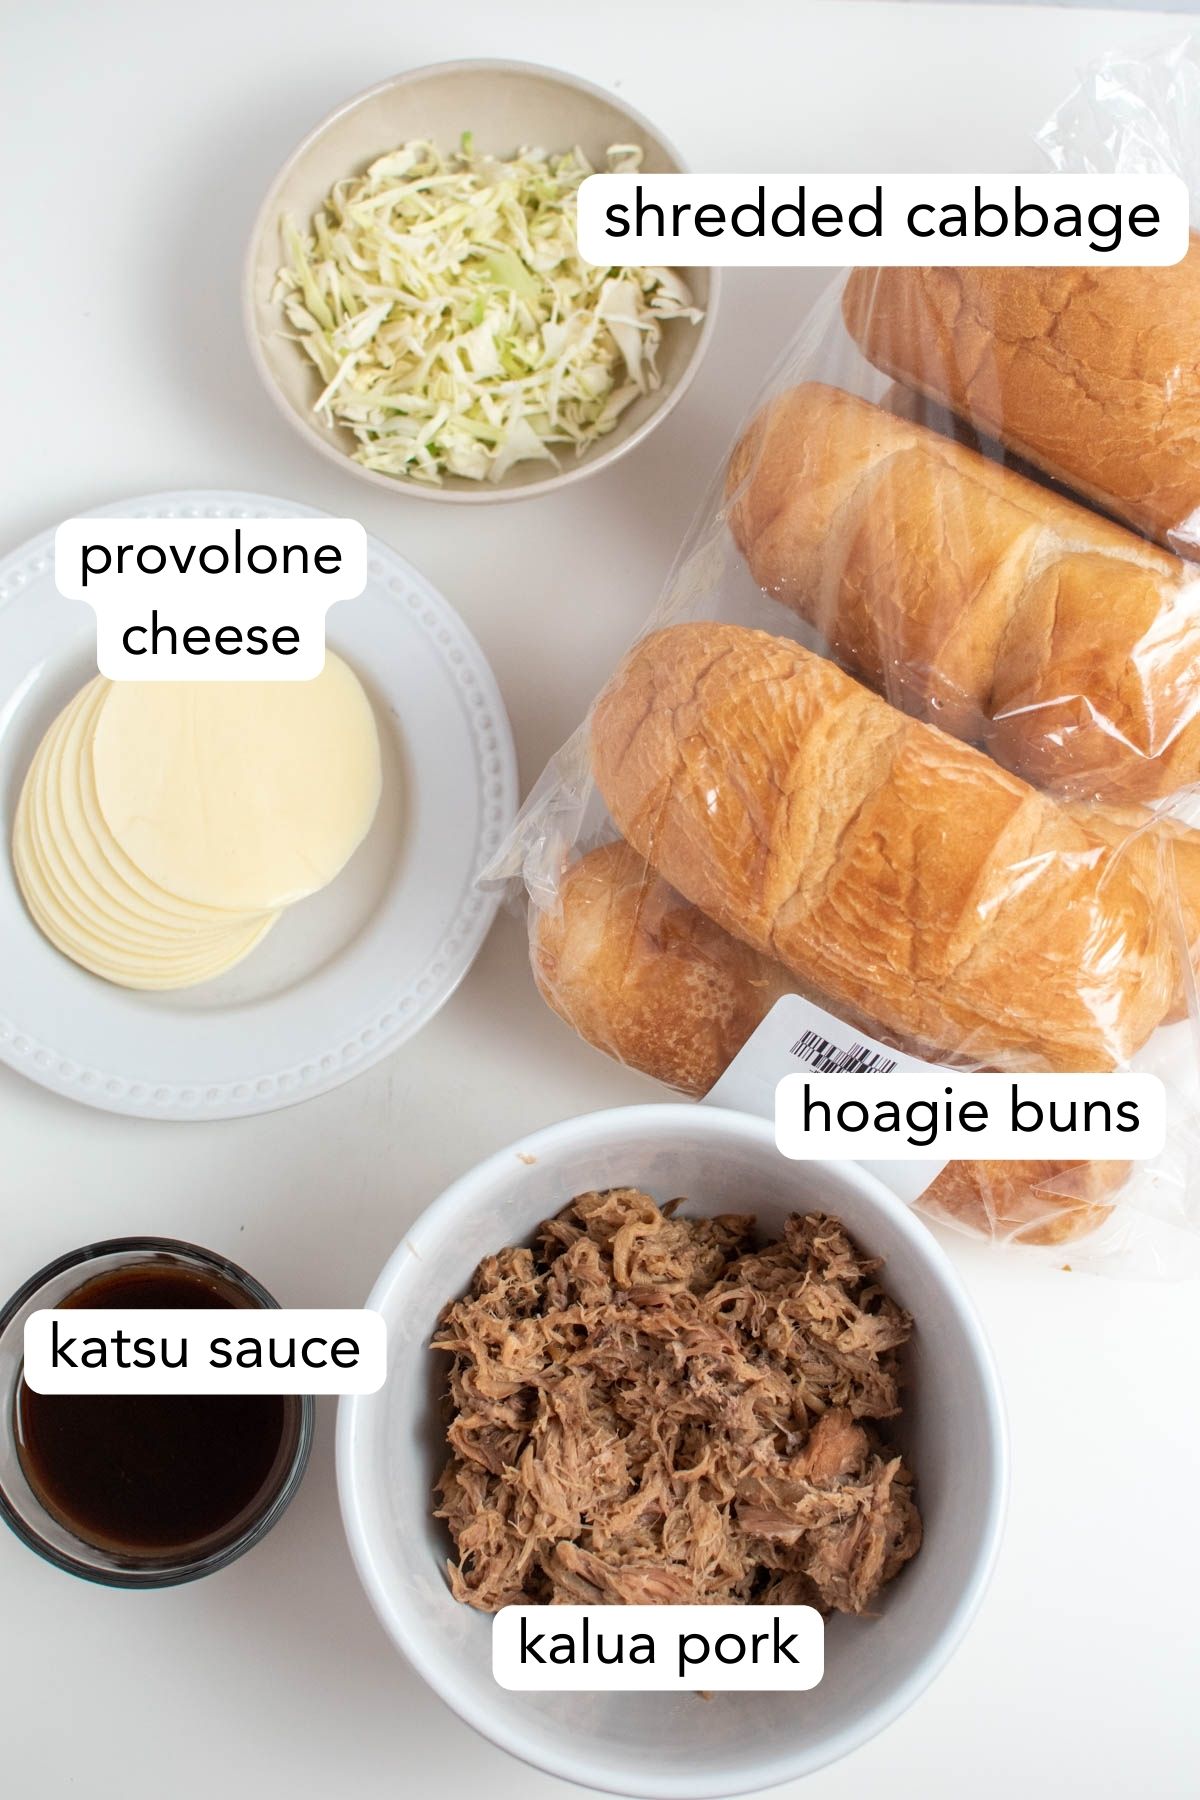 Labeled photo of kalua pork sandwich ingredients including cheese, katsu sauce, and hoagie buns.